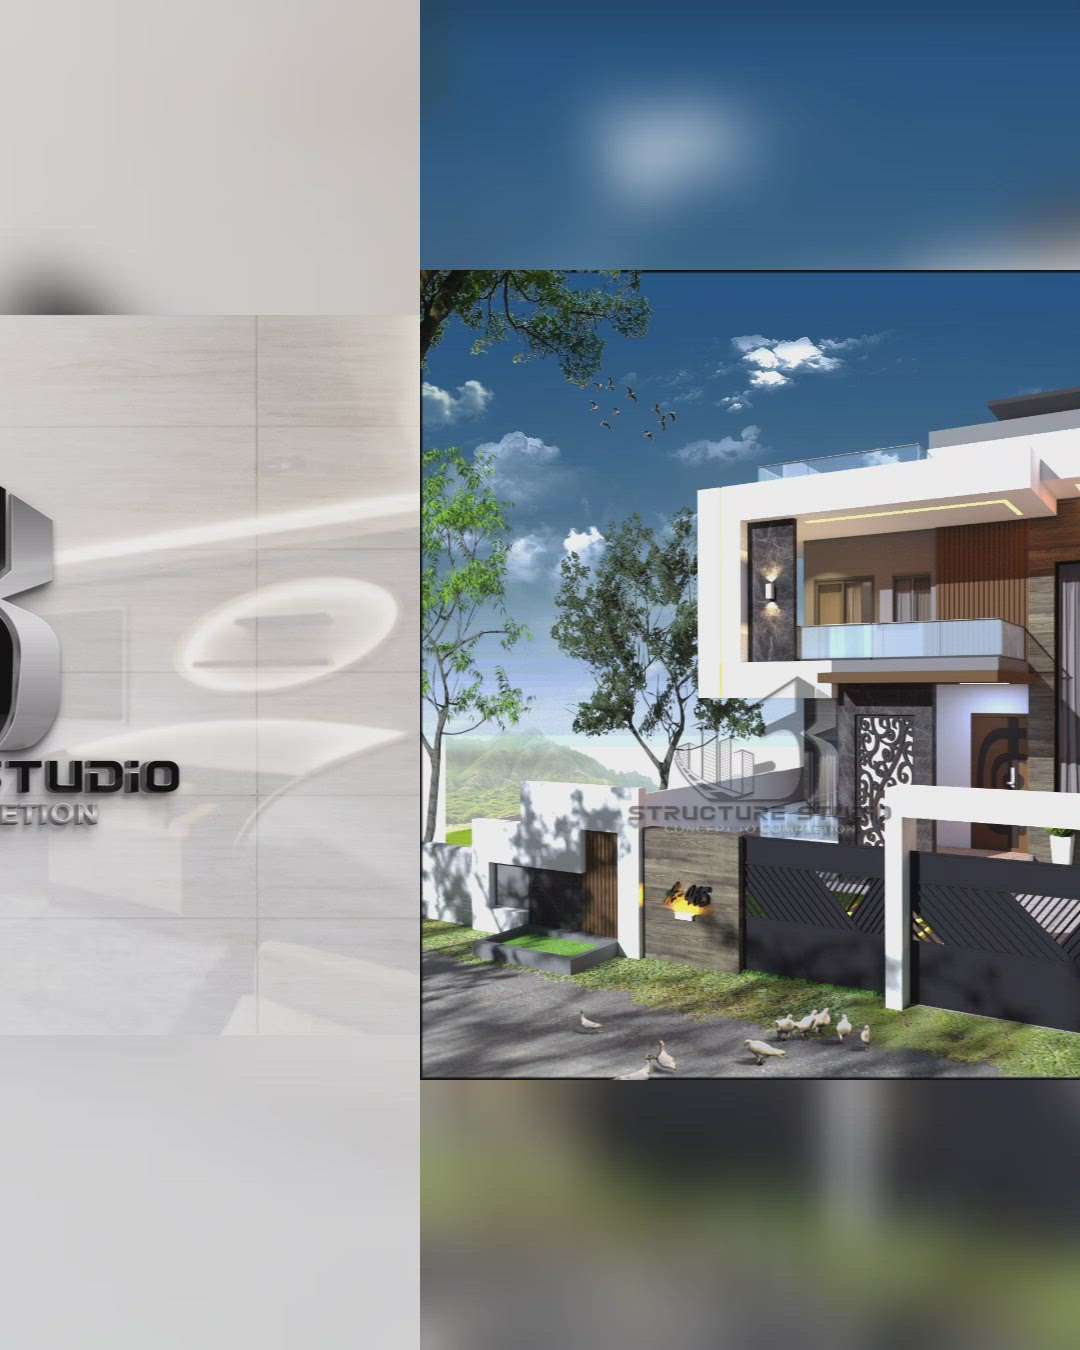 40×60 ft G+1 house design. 
contact us on +91-7415834146 for your house design and construction. 
. 
. 
. 
. 
. 
 
. 
. 
. 
#modernhouse #architecture #interiordesign #design #interior #modern #house #home #homedecor #modernhome #modernarchitecture #homedesign #moderndesign #housedesign #architect #architecturelovers #luxuryhomes #archilovers #archdaily #decor #luxury #modernhome